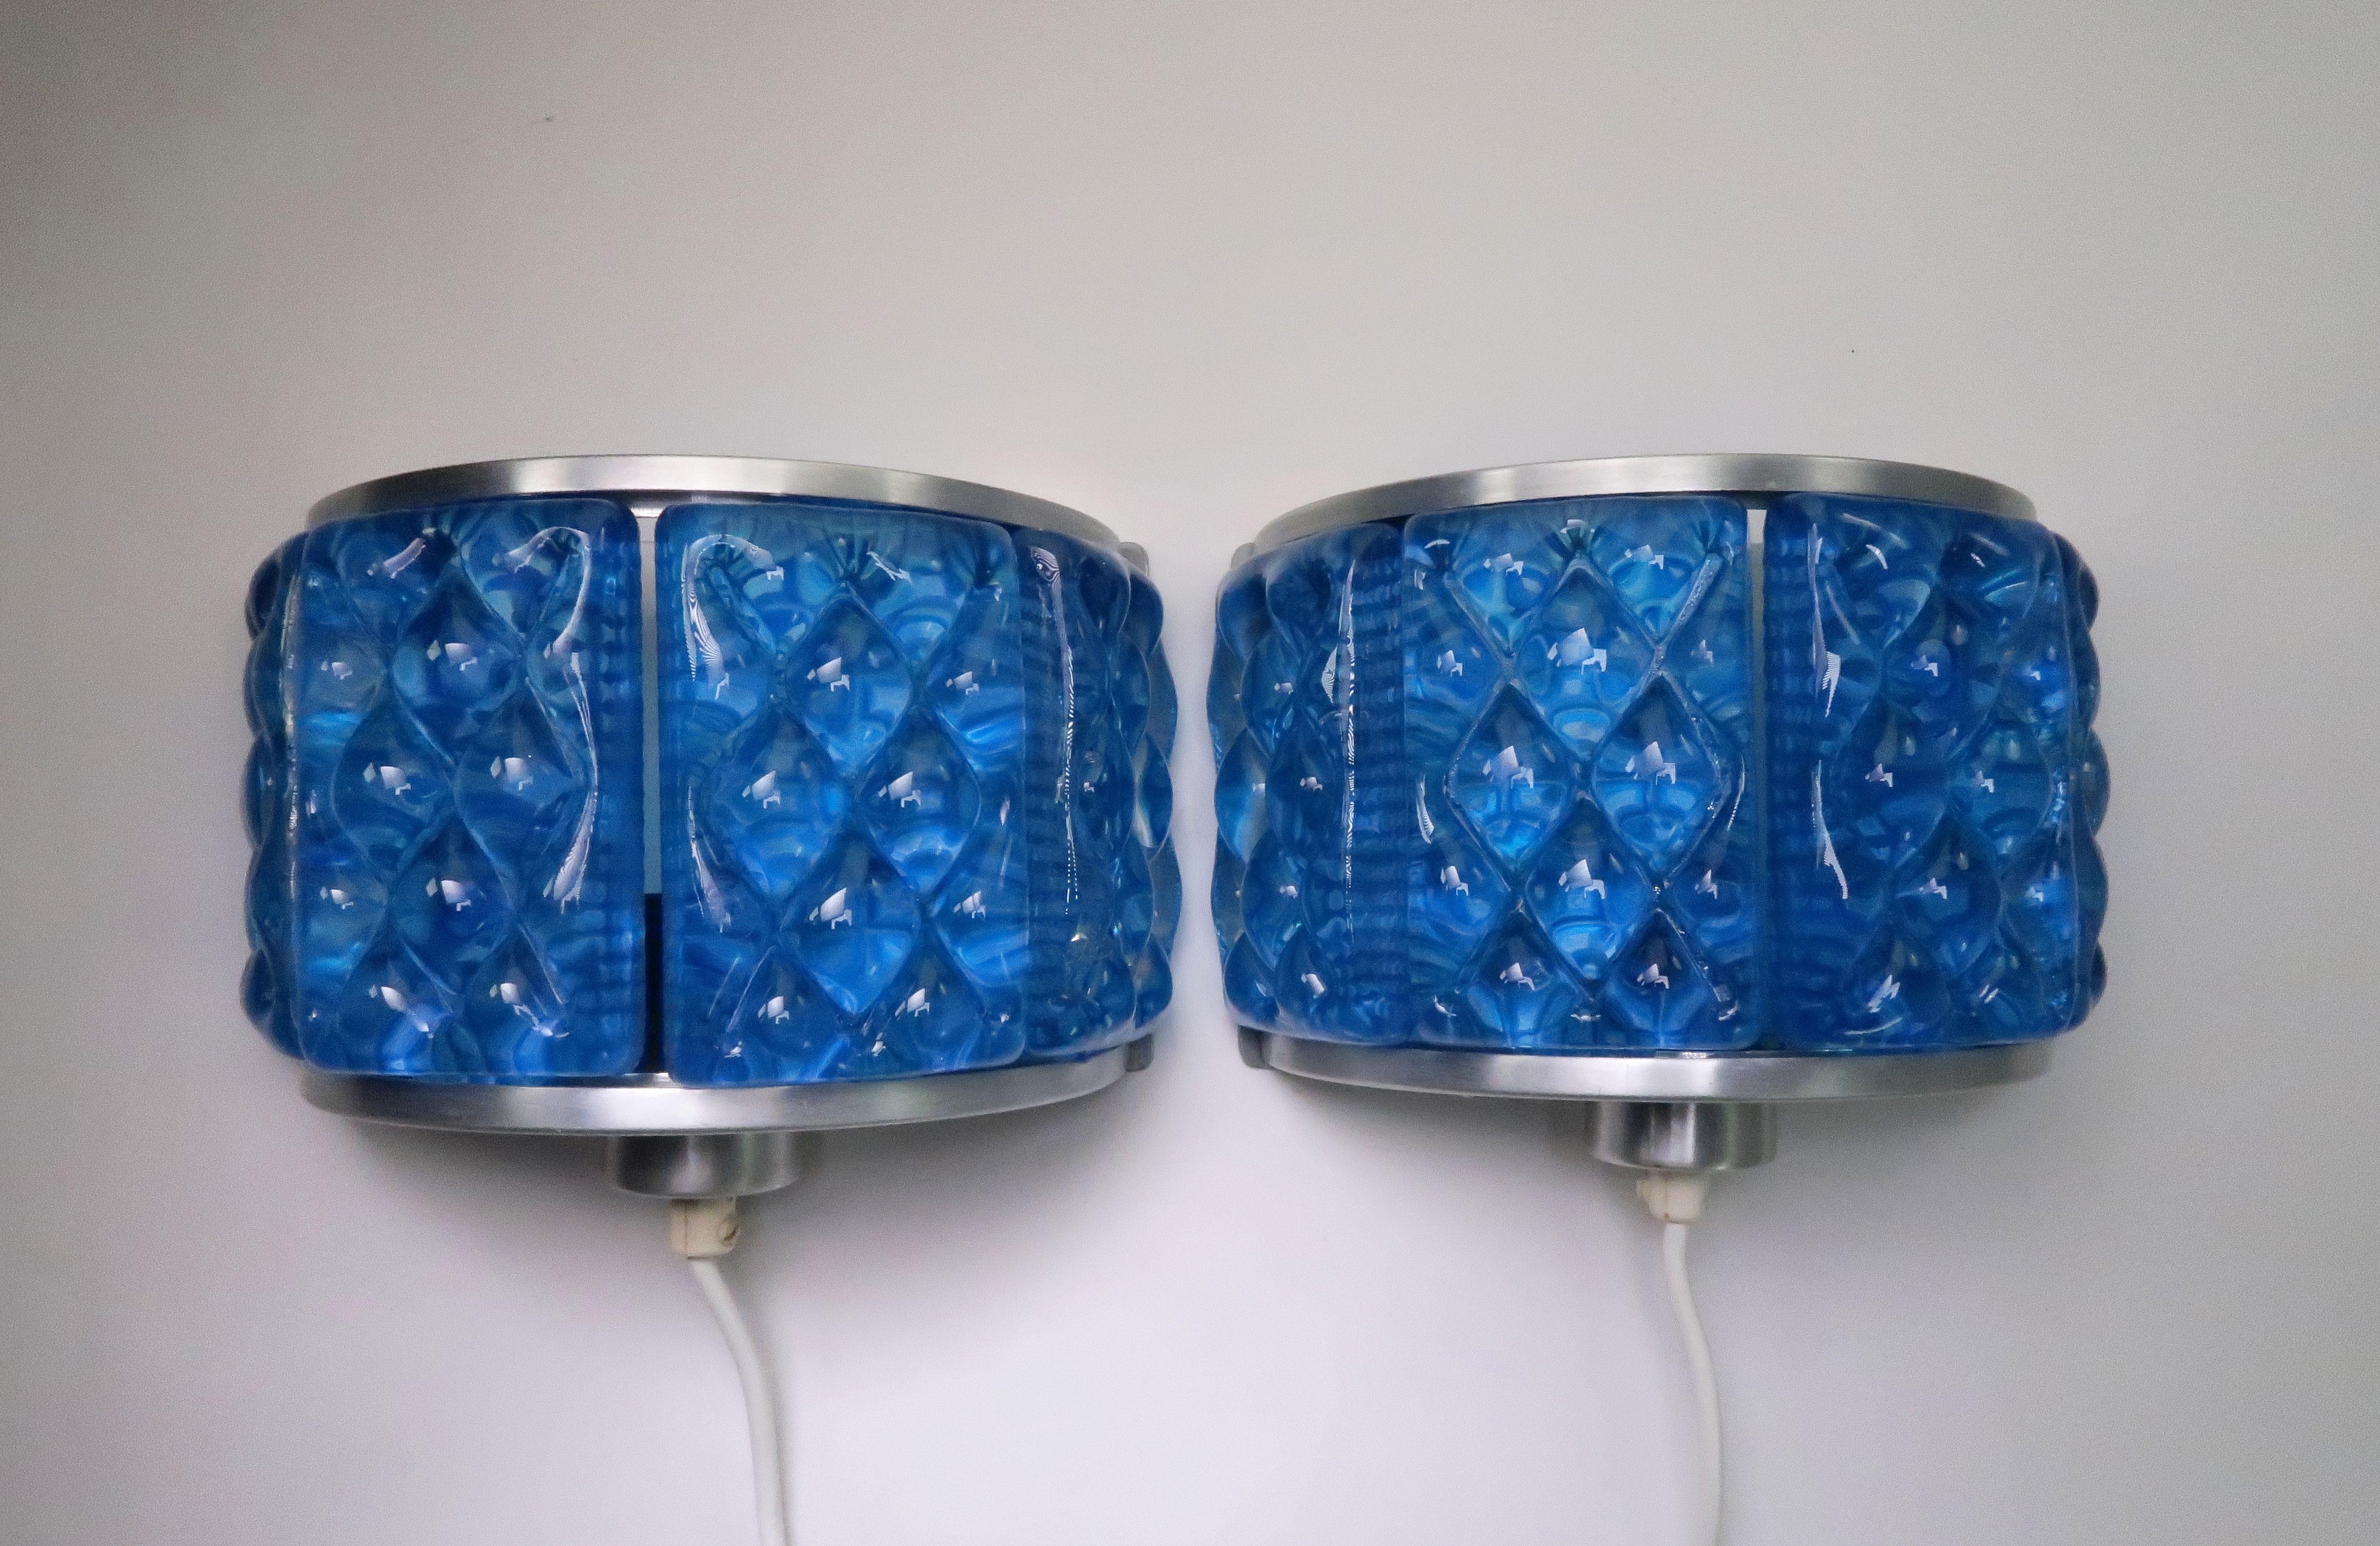 Beautiful set of Danish Mid-Century Modern pressed, clear blue glass wall lights by Vitrika in collaboration with Swedish Orrefors. Half-spherical shaped wall sconces featuring four thick, textured, cobalt blue glass pieces secured and held in place